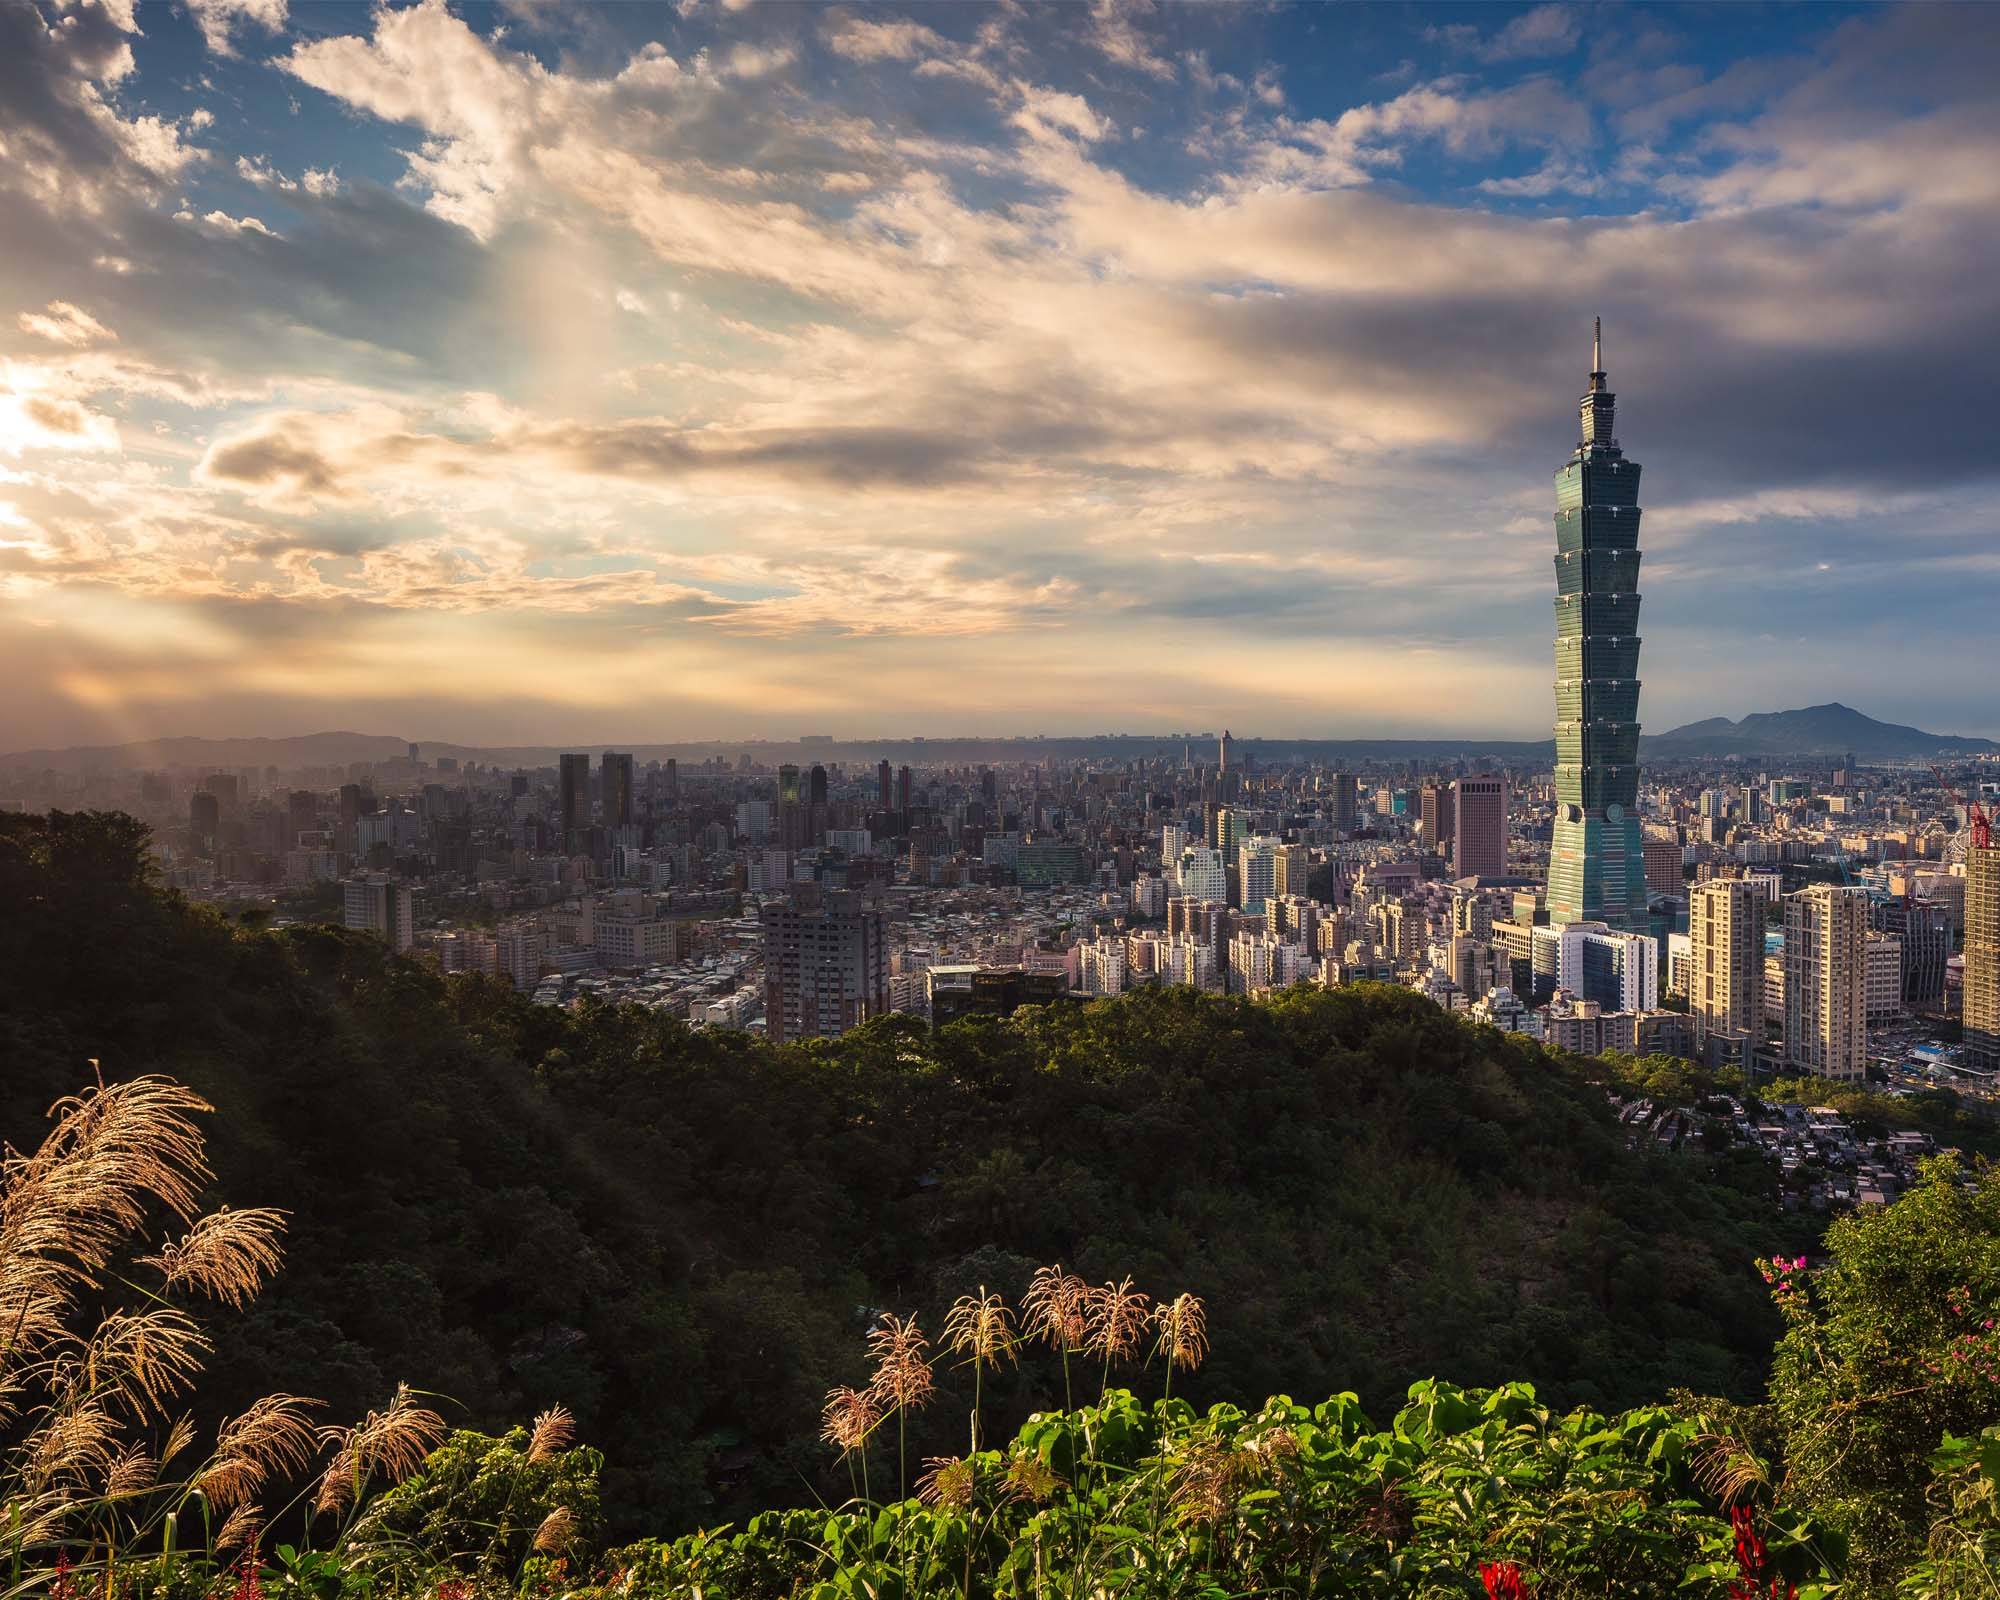 Overview of the Taipei skyline with dramatic sky and clouds